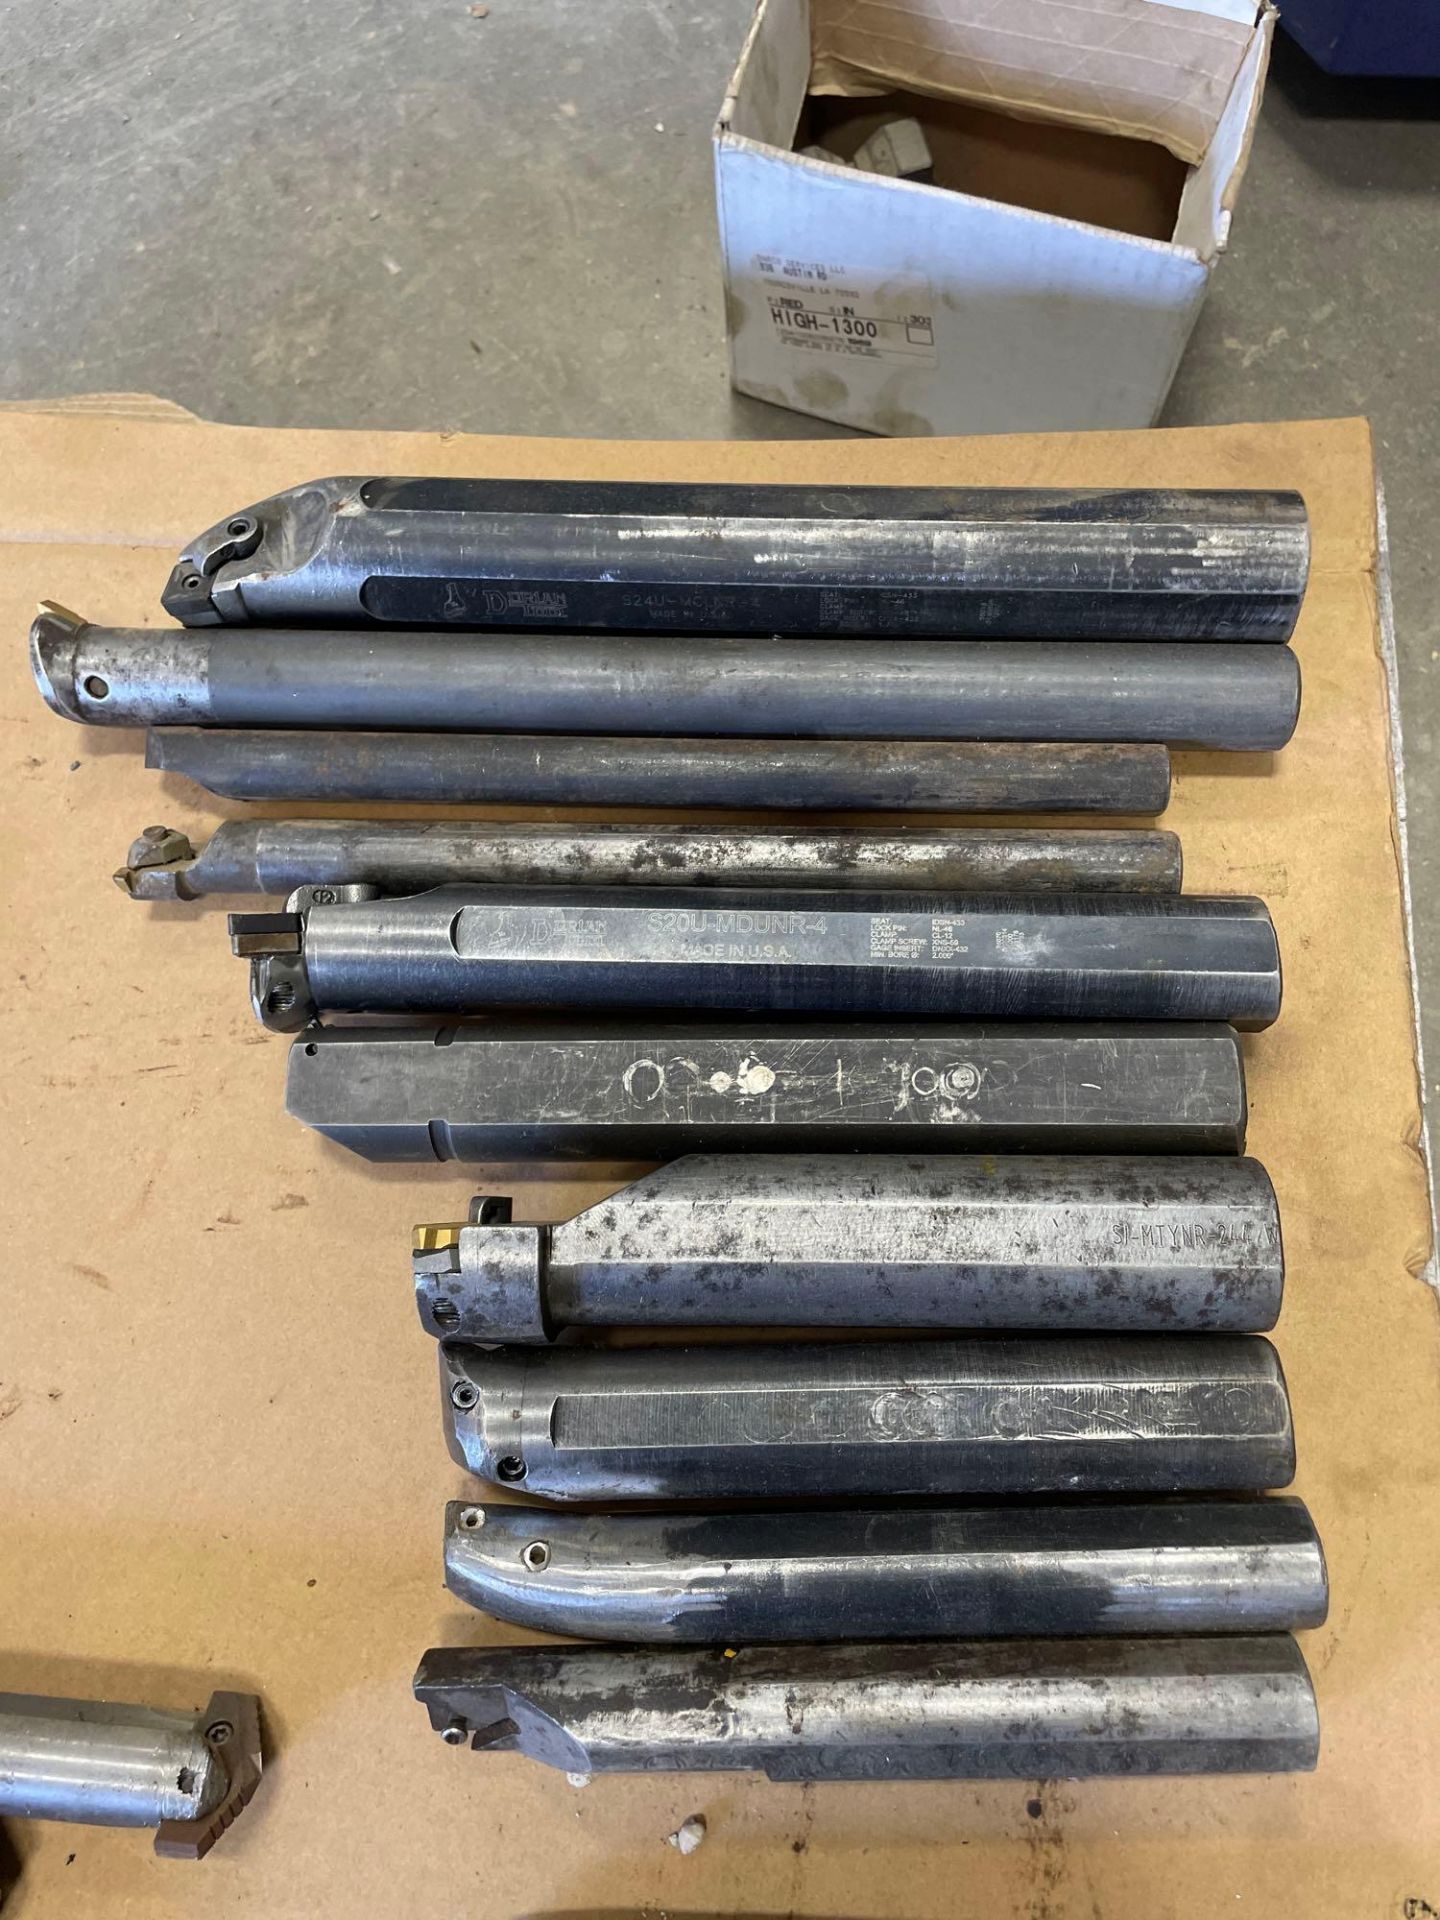 Lot of 8: Assorted Size Boring Bars Ranging from 7” L X 1” Dia to 11” L X 2” Dia - Image 2 of 4